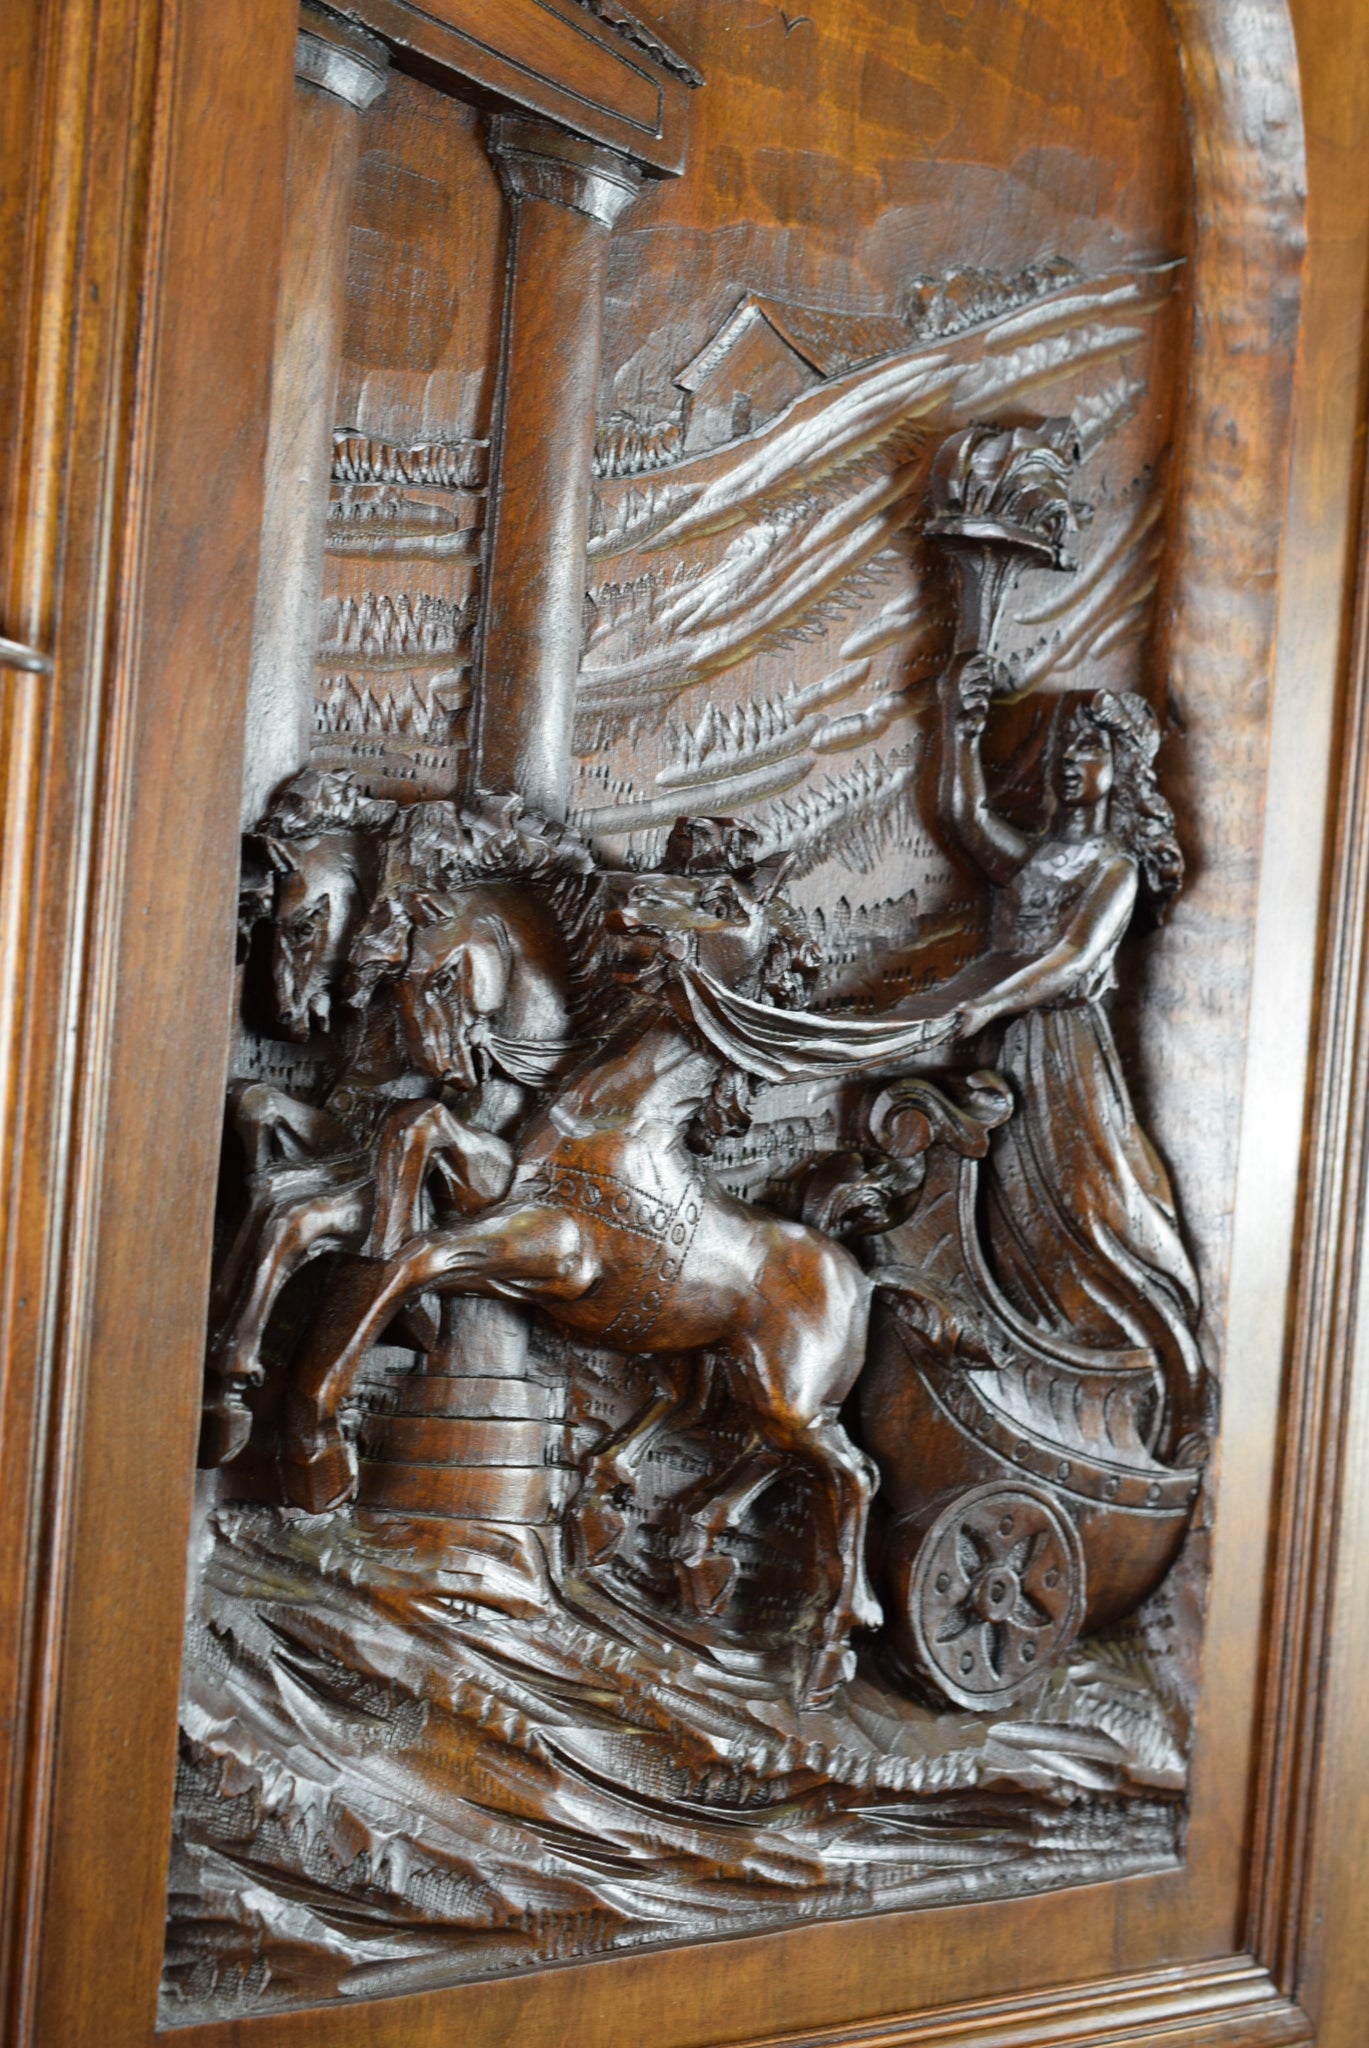 Large Deep Carved Panel Door Solid Wood with Horse Chariot